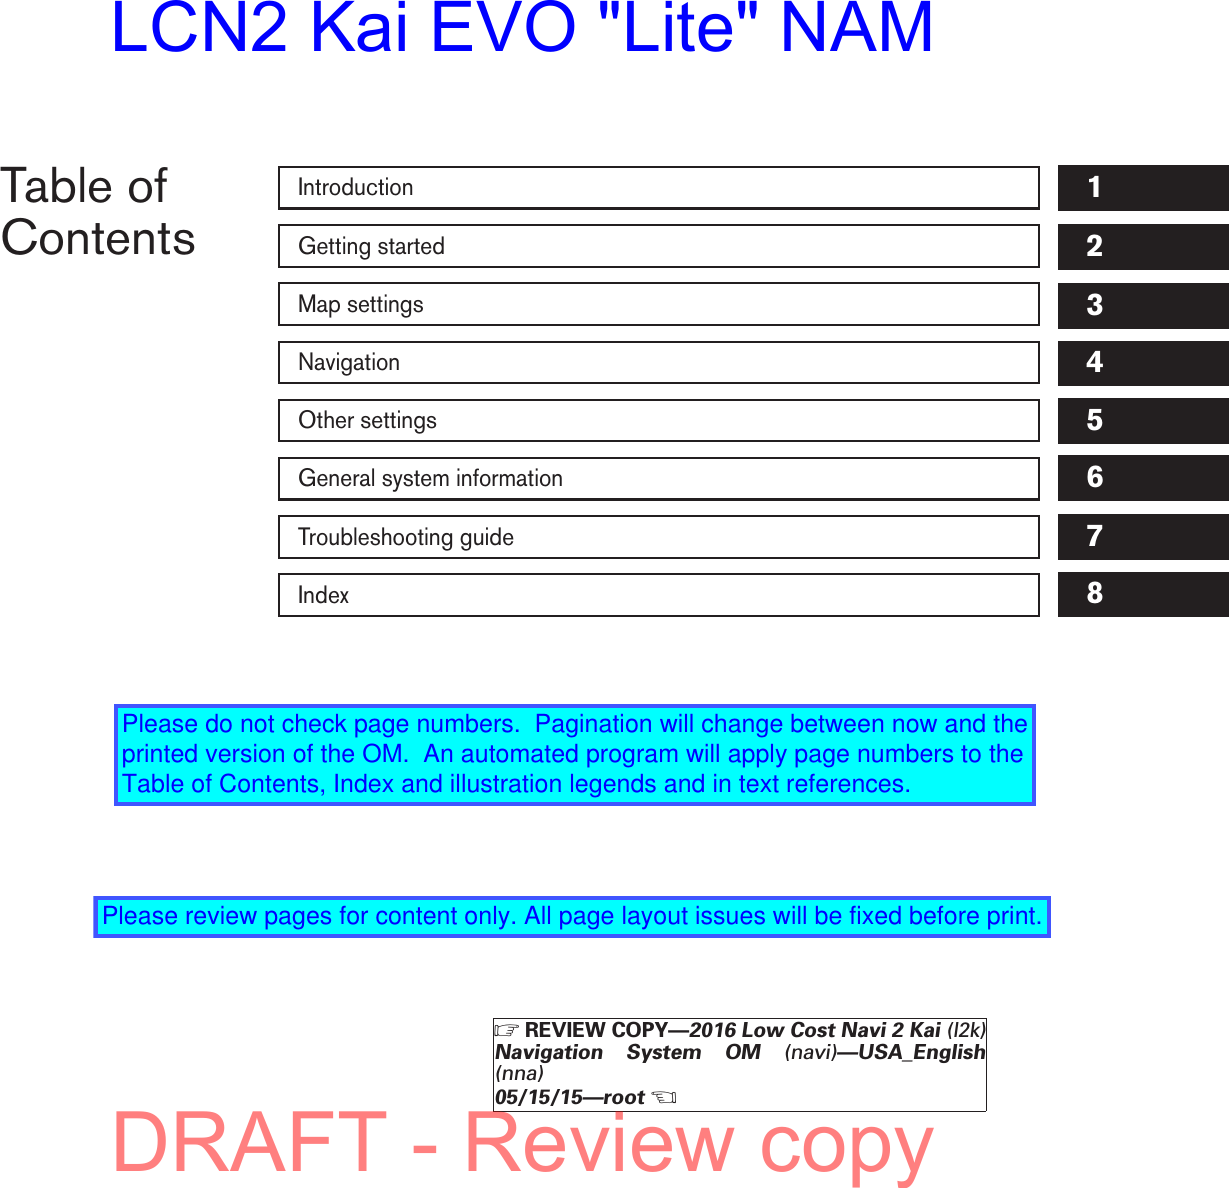 Table ofContentsIntroductionGetting startedMap settingsNavigationOther settingsGeneral system informationTroubleshooting guideIndex12345678ZREVIEW COPY—2016 Low Cost Navi 2 Kai (l2k)Navigation System OM (navi)—USA_English(nna)05/15/15—rootXDRAFT - Review copyLCN2 Kai EVO &quot;Lite&quot; NAMPlease do not check page numbers.  Pagination will change between now and the printed version of the OM.  An automated program will apply page numbers to the Table of Contents, Index and illustration legends and in text references.Please review pages for content only. All page layout issues will be fixed before print.